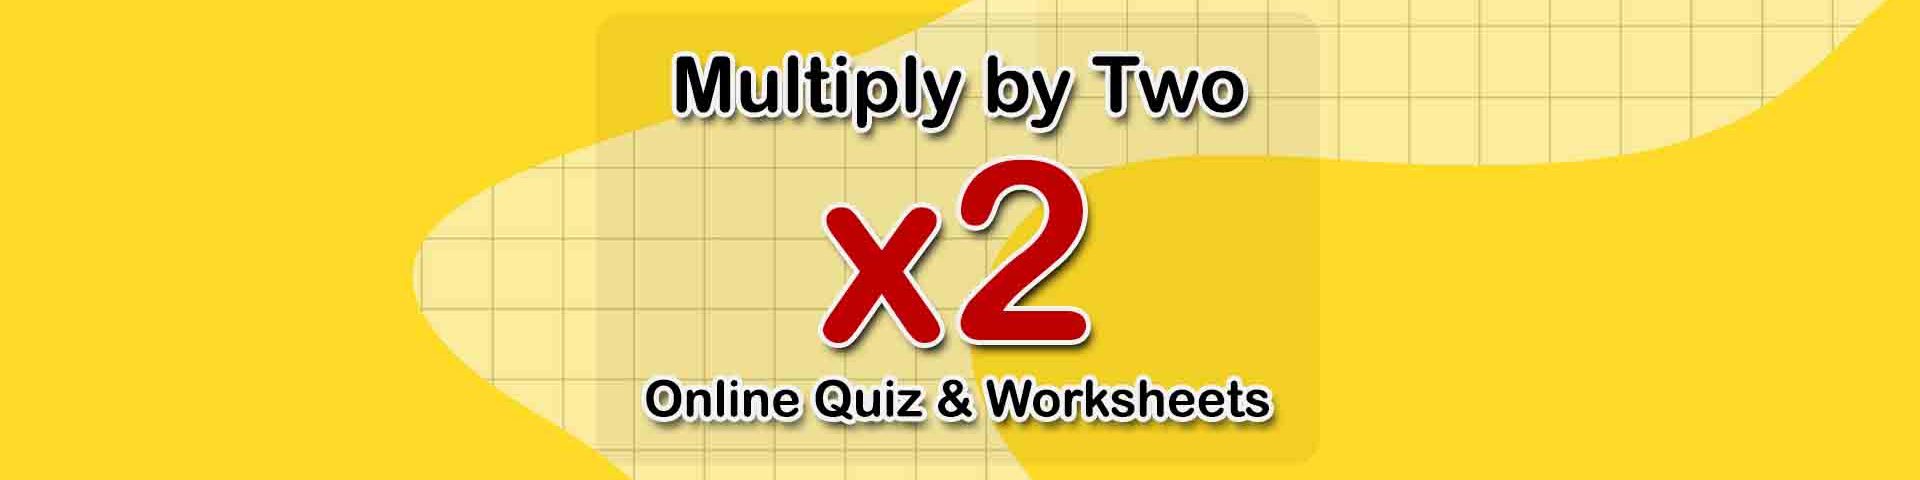 Multiply by Two (Online Quiz & Worksheets for Math)